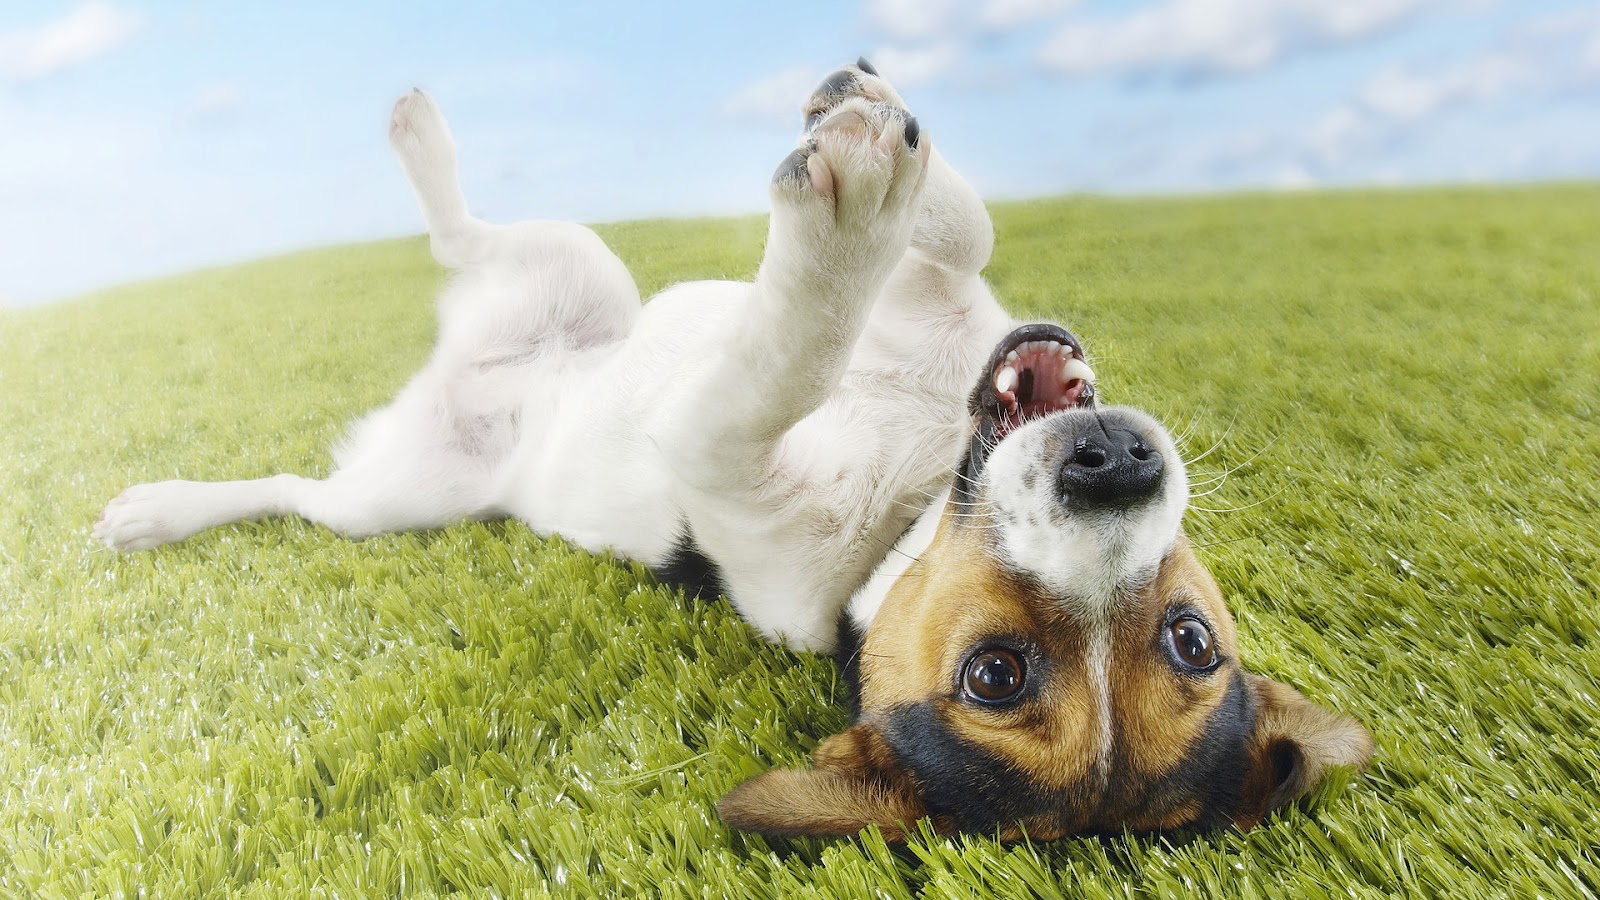  dog wallpaper with a dog on his back on the grass hd dogs wallpapers